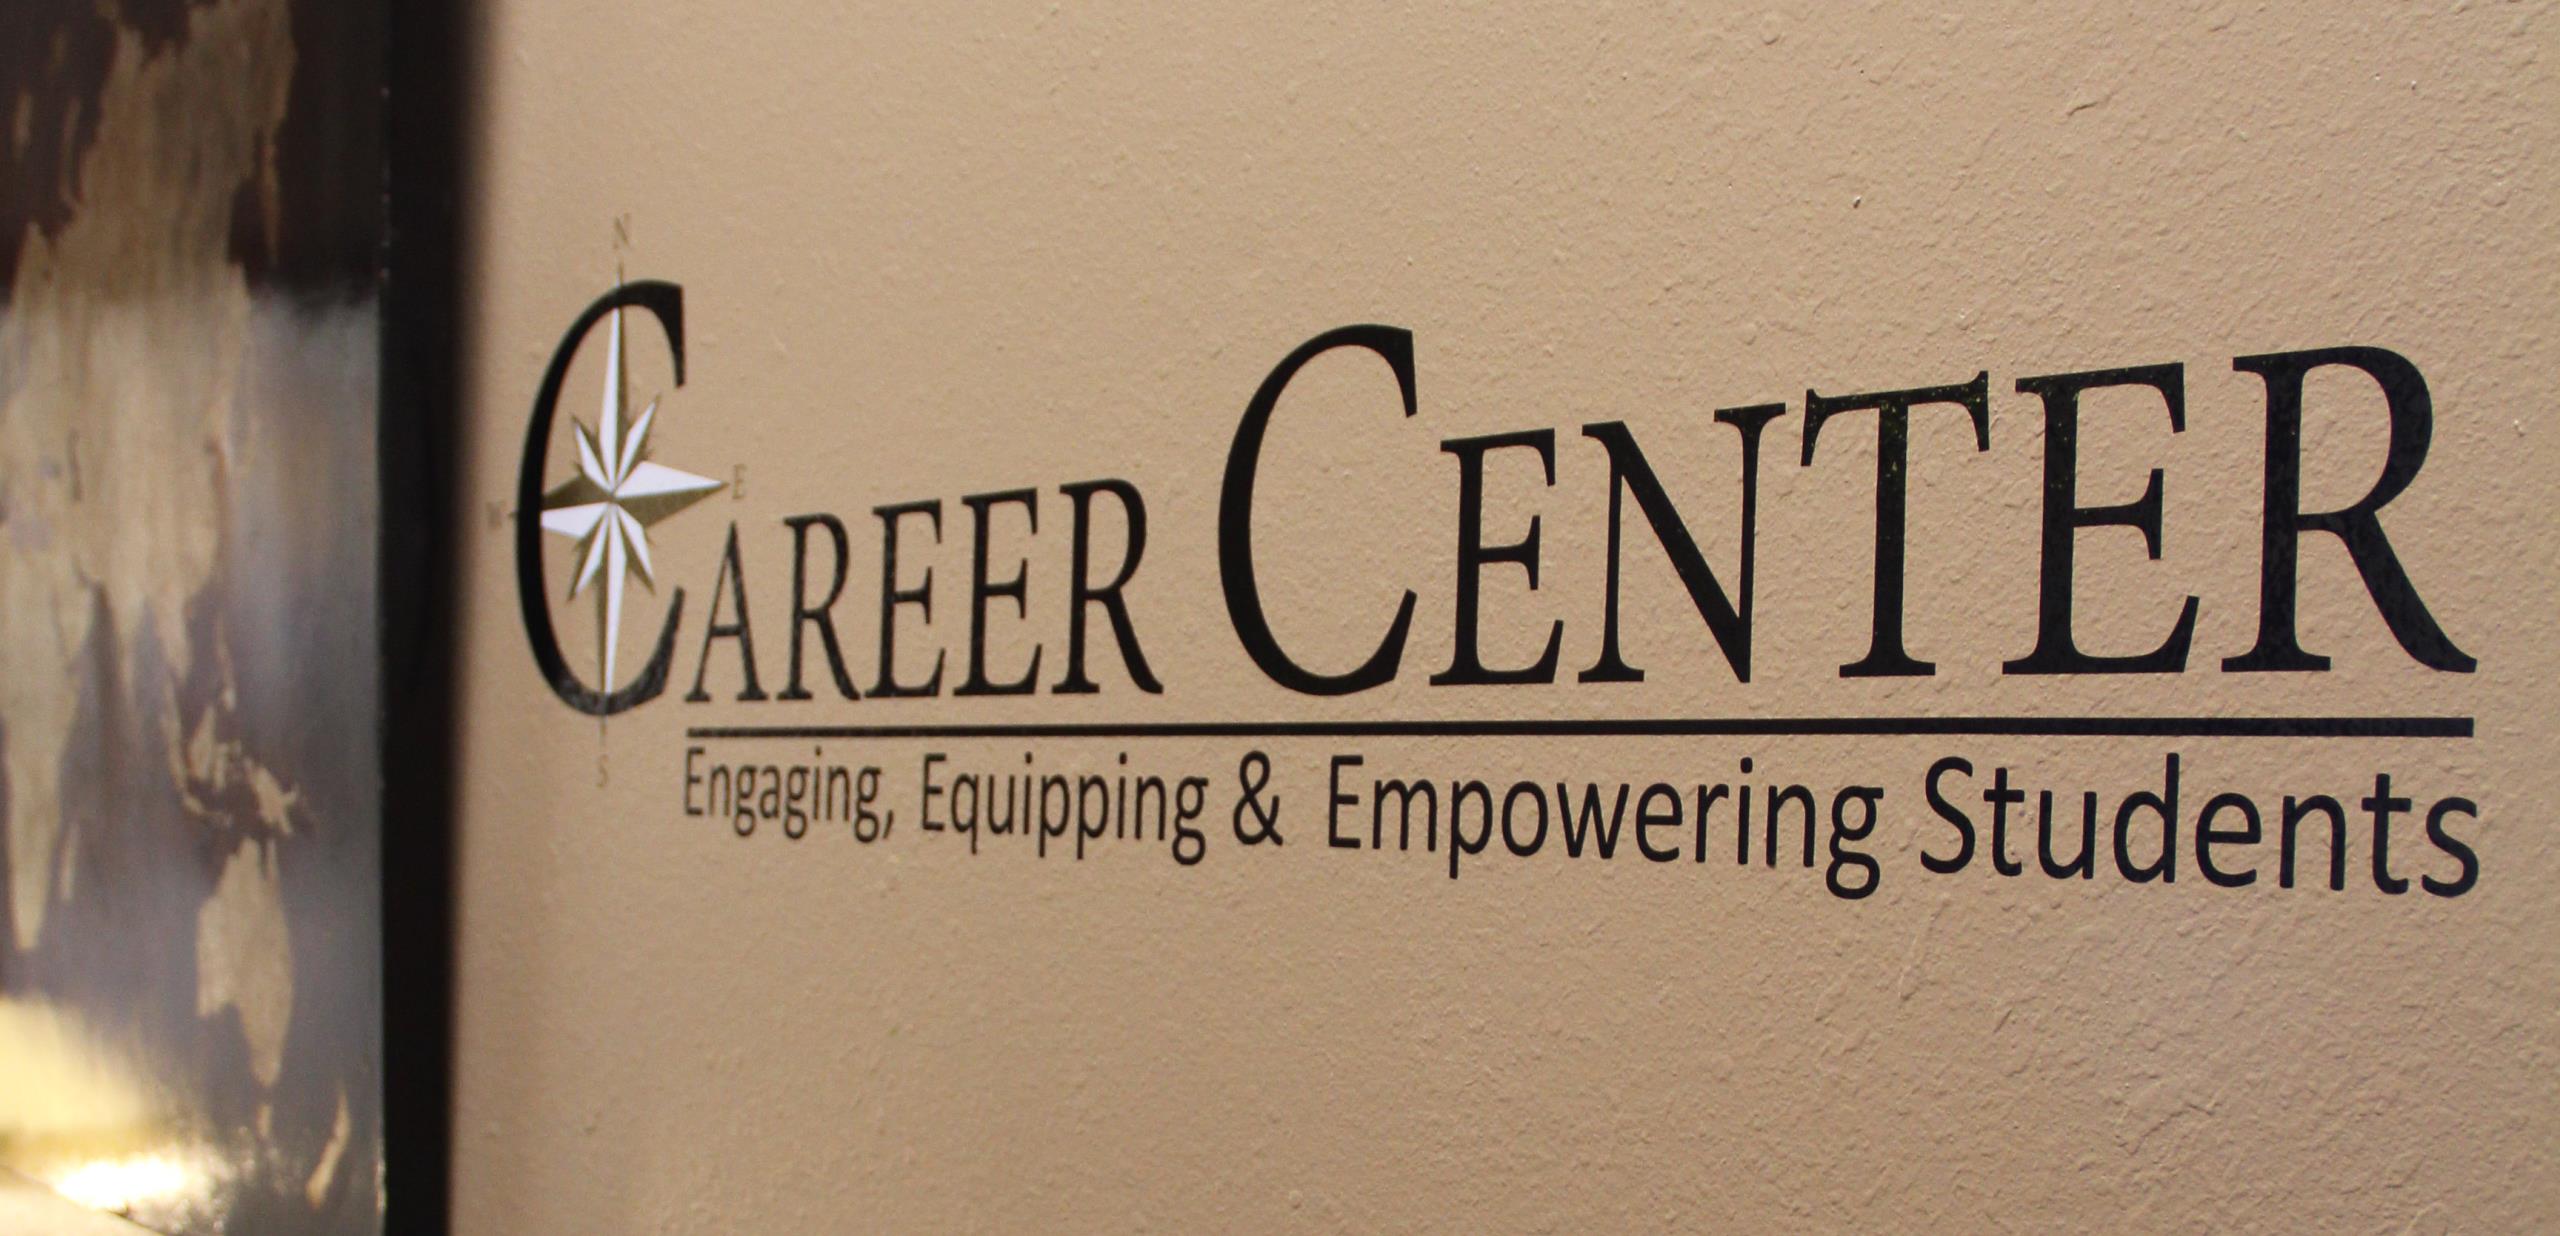 Sign and logo for the Vanek Center for Vocation and Callings